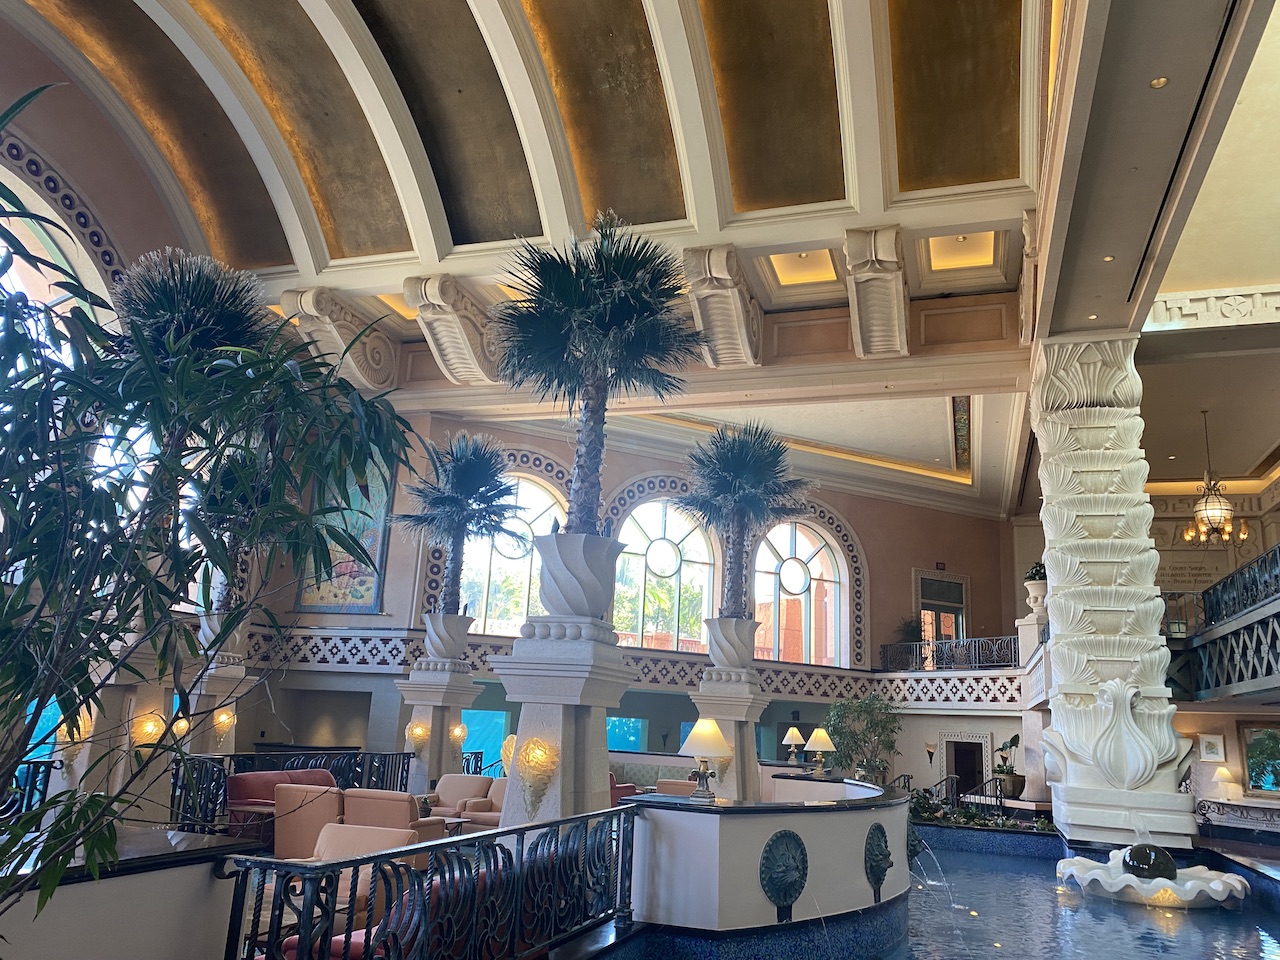 Atlantis Bahamas architectural marvel generously delivers eye candy from the columns to the indoor water features